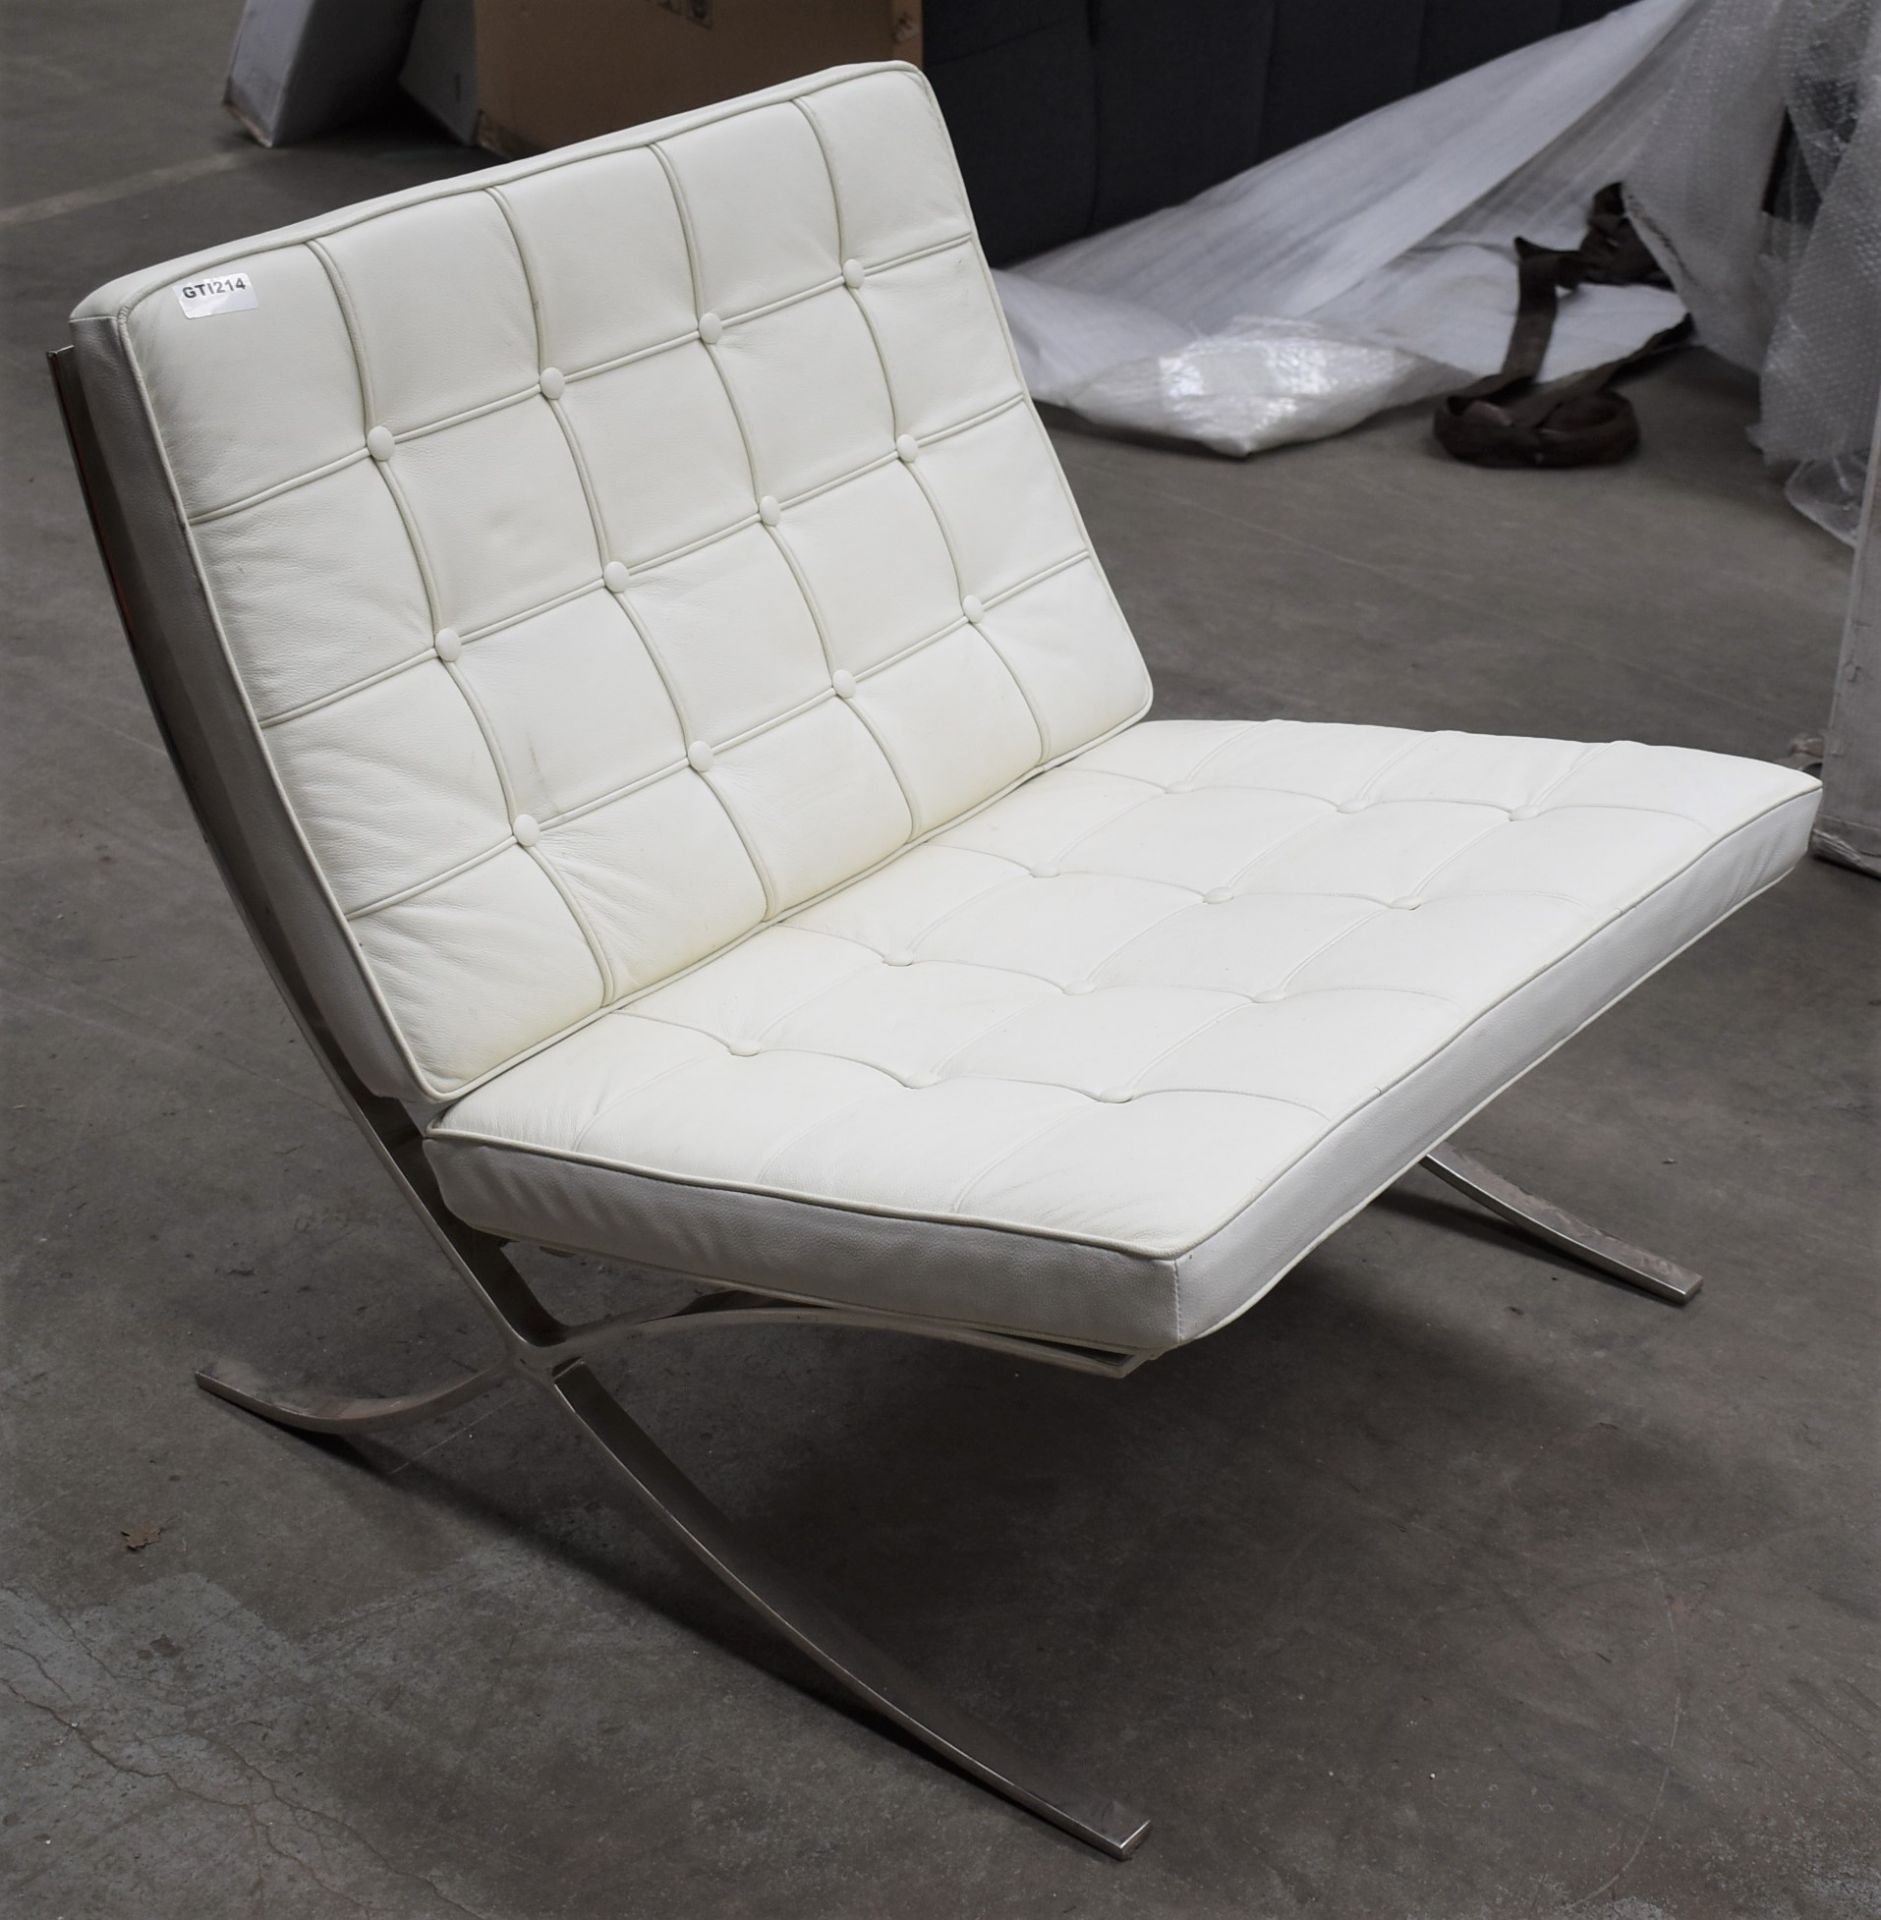 1 x Contemporary Lounge Chair With Strap Supports, Chrome Base and White Leather Studded Seat and - Image 4 of 9